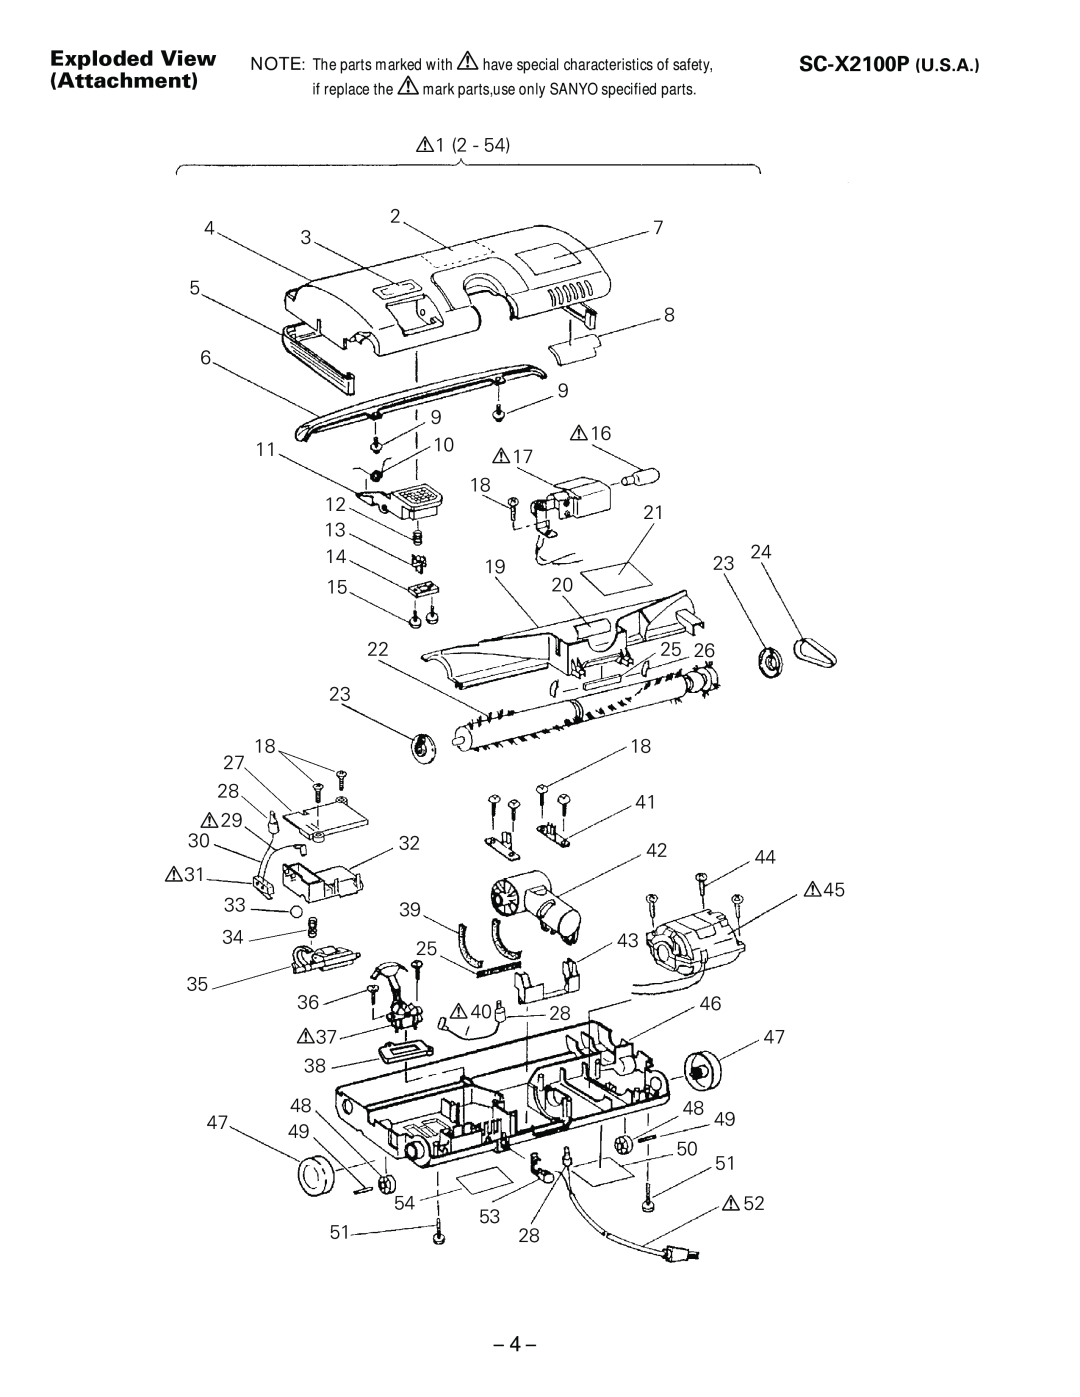 Sanyo specifications Exploded View Attachment, SC-X2100P U.S.A 